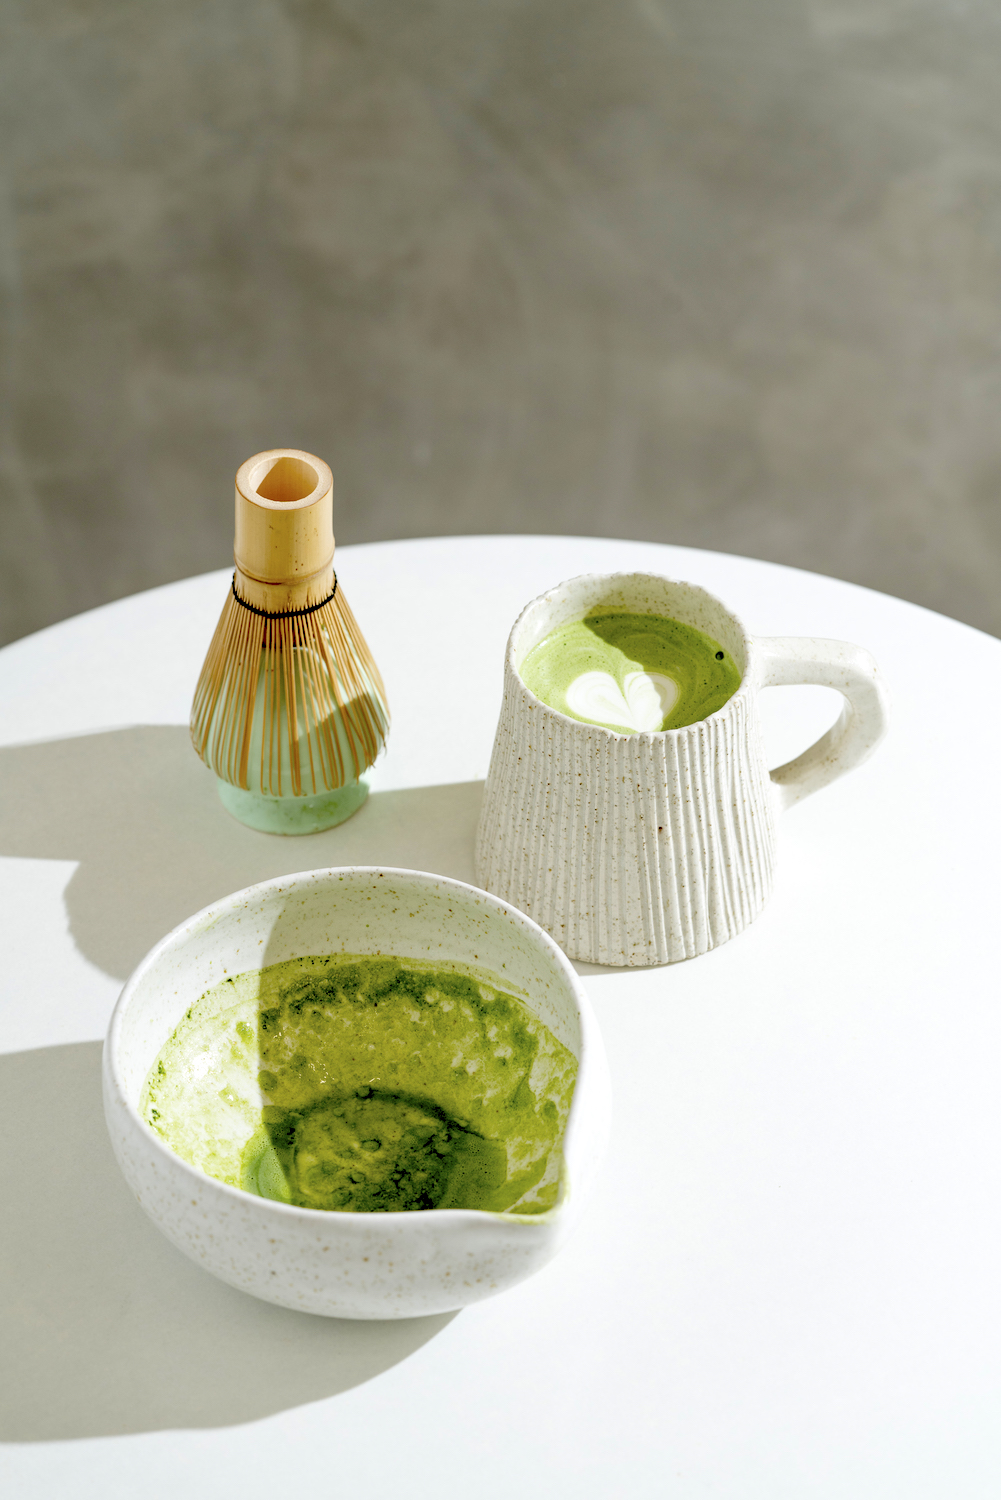 A delight to experience the matcha latte in Mia Casal ceramics